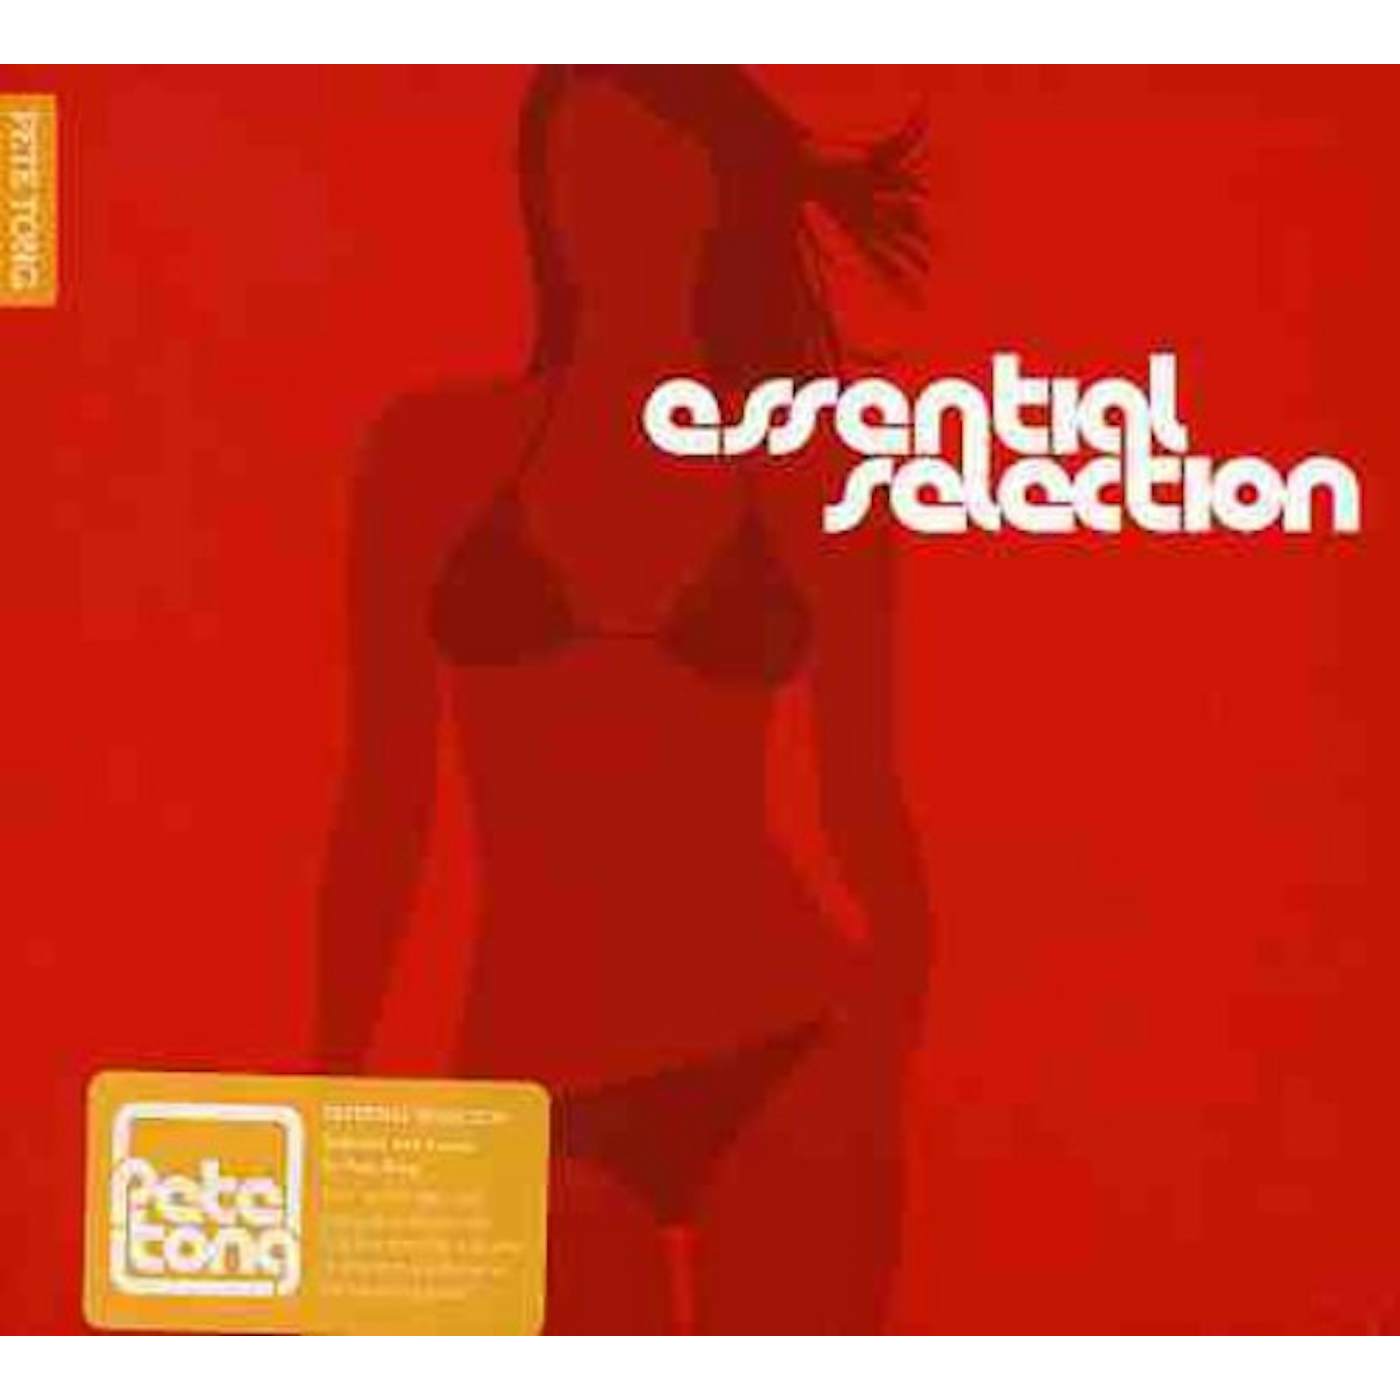 Pete Tong ESSENTIAL SELECTION CD